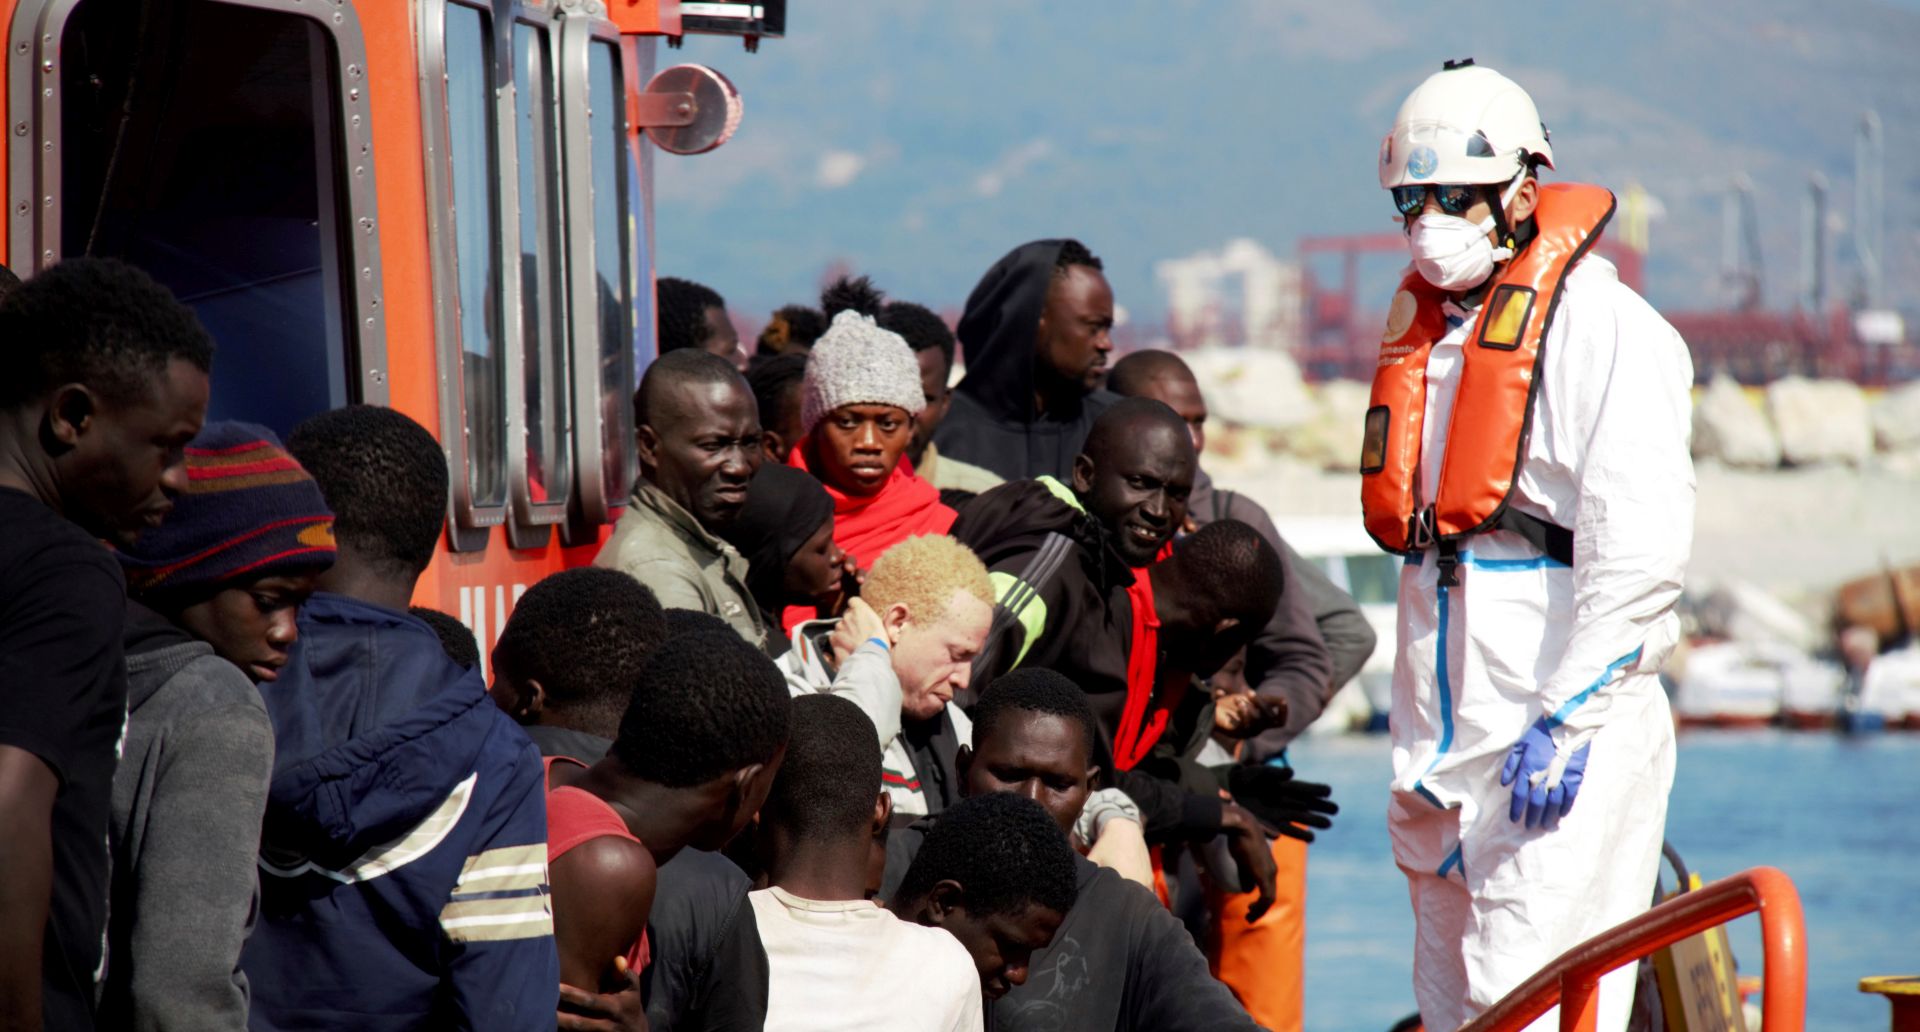 epa07725551 Some of 124 migrants arrive at the Granada port in Motril, Granada, Spain, 18 July 2019. Maritime Rescue rescued 124 migrants, including twenty women and four children, when they were sailing in the waters of the Alboran Sea.  EPA/Alba Feixas